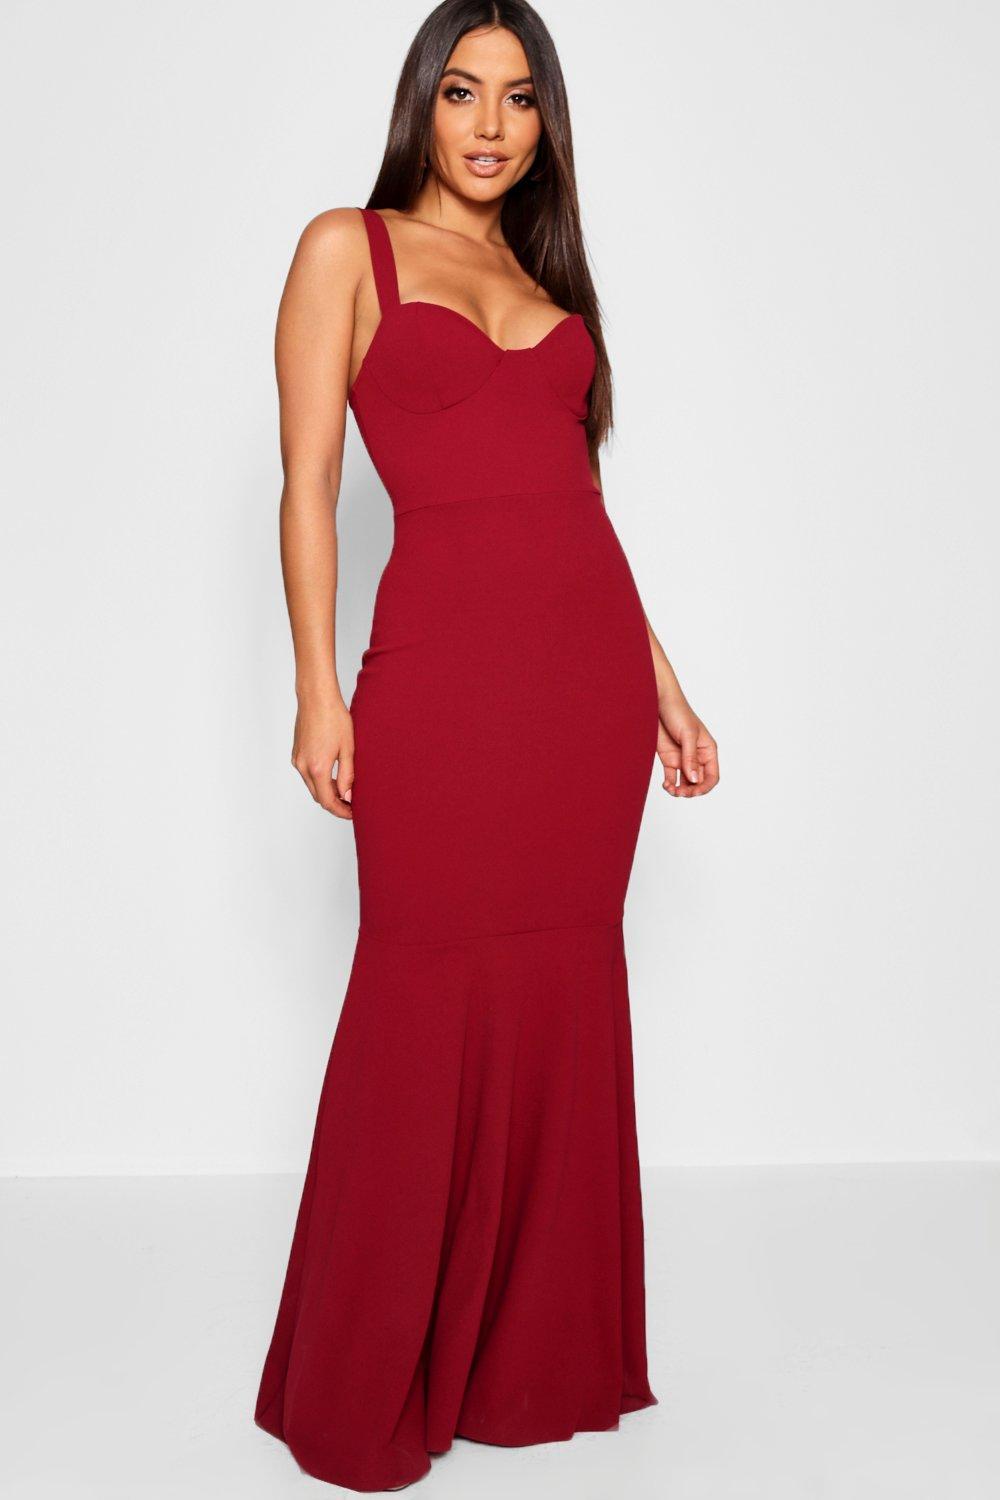 Lyst - Boohoo Bustier Detail Fishtail Maxi Dress in Red